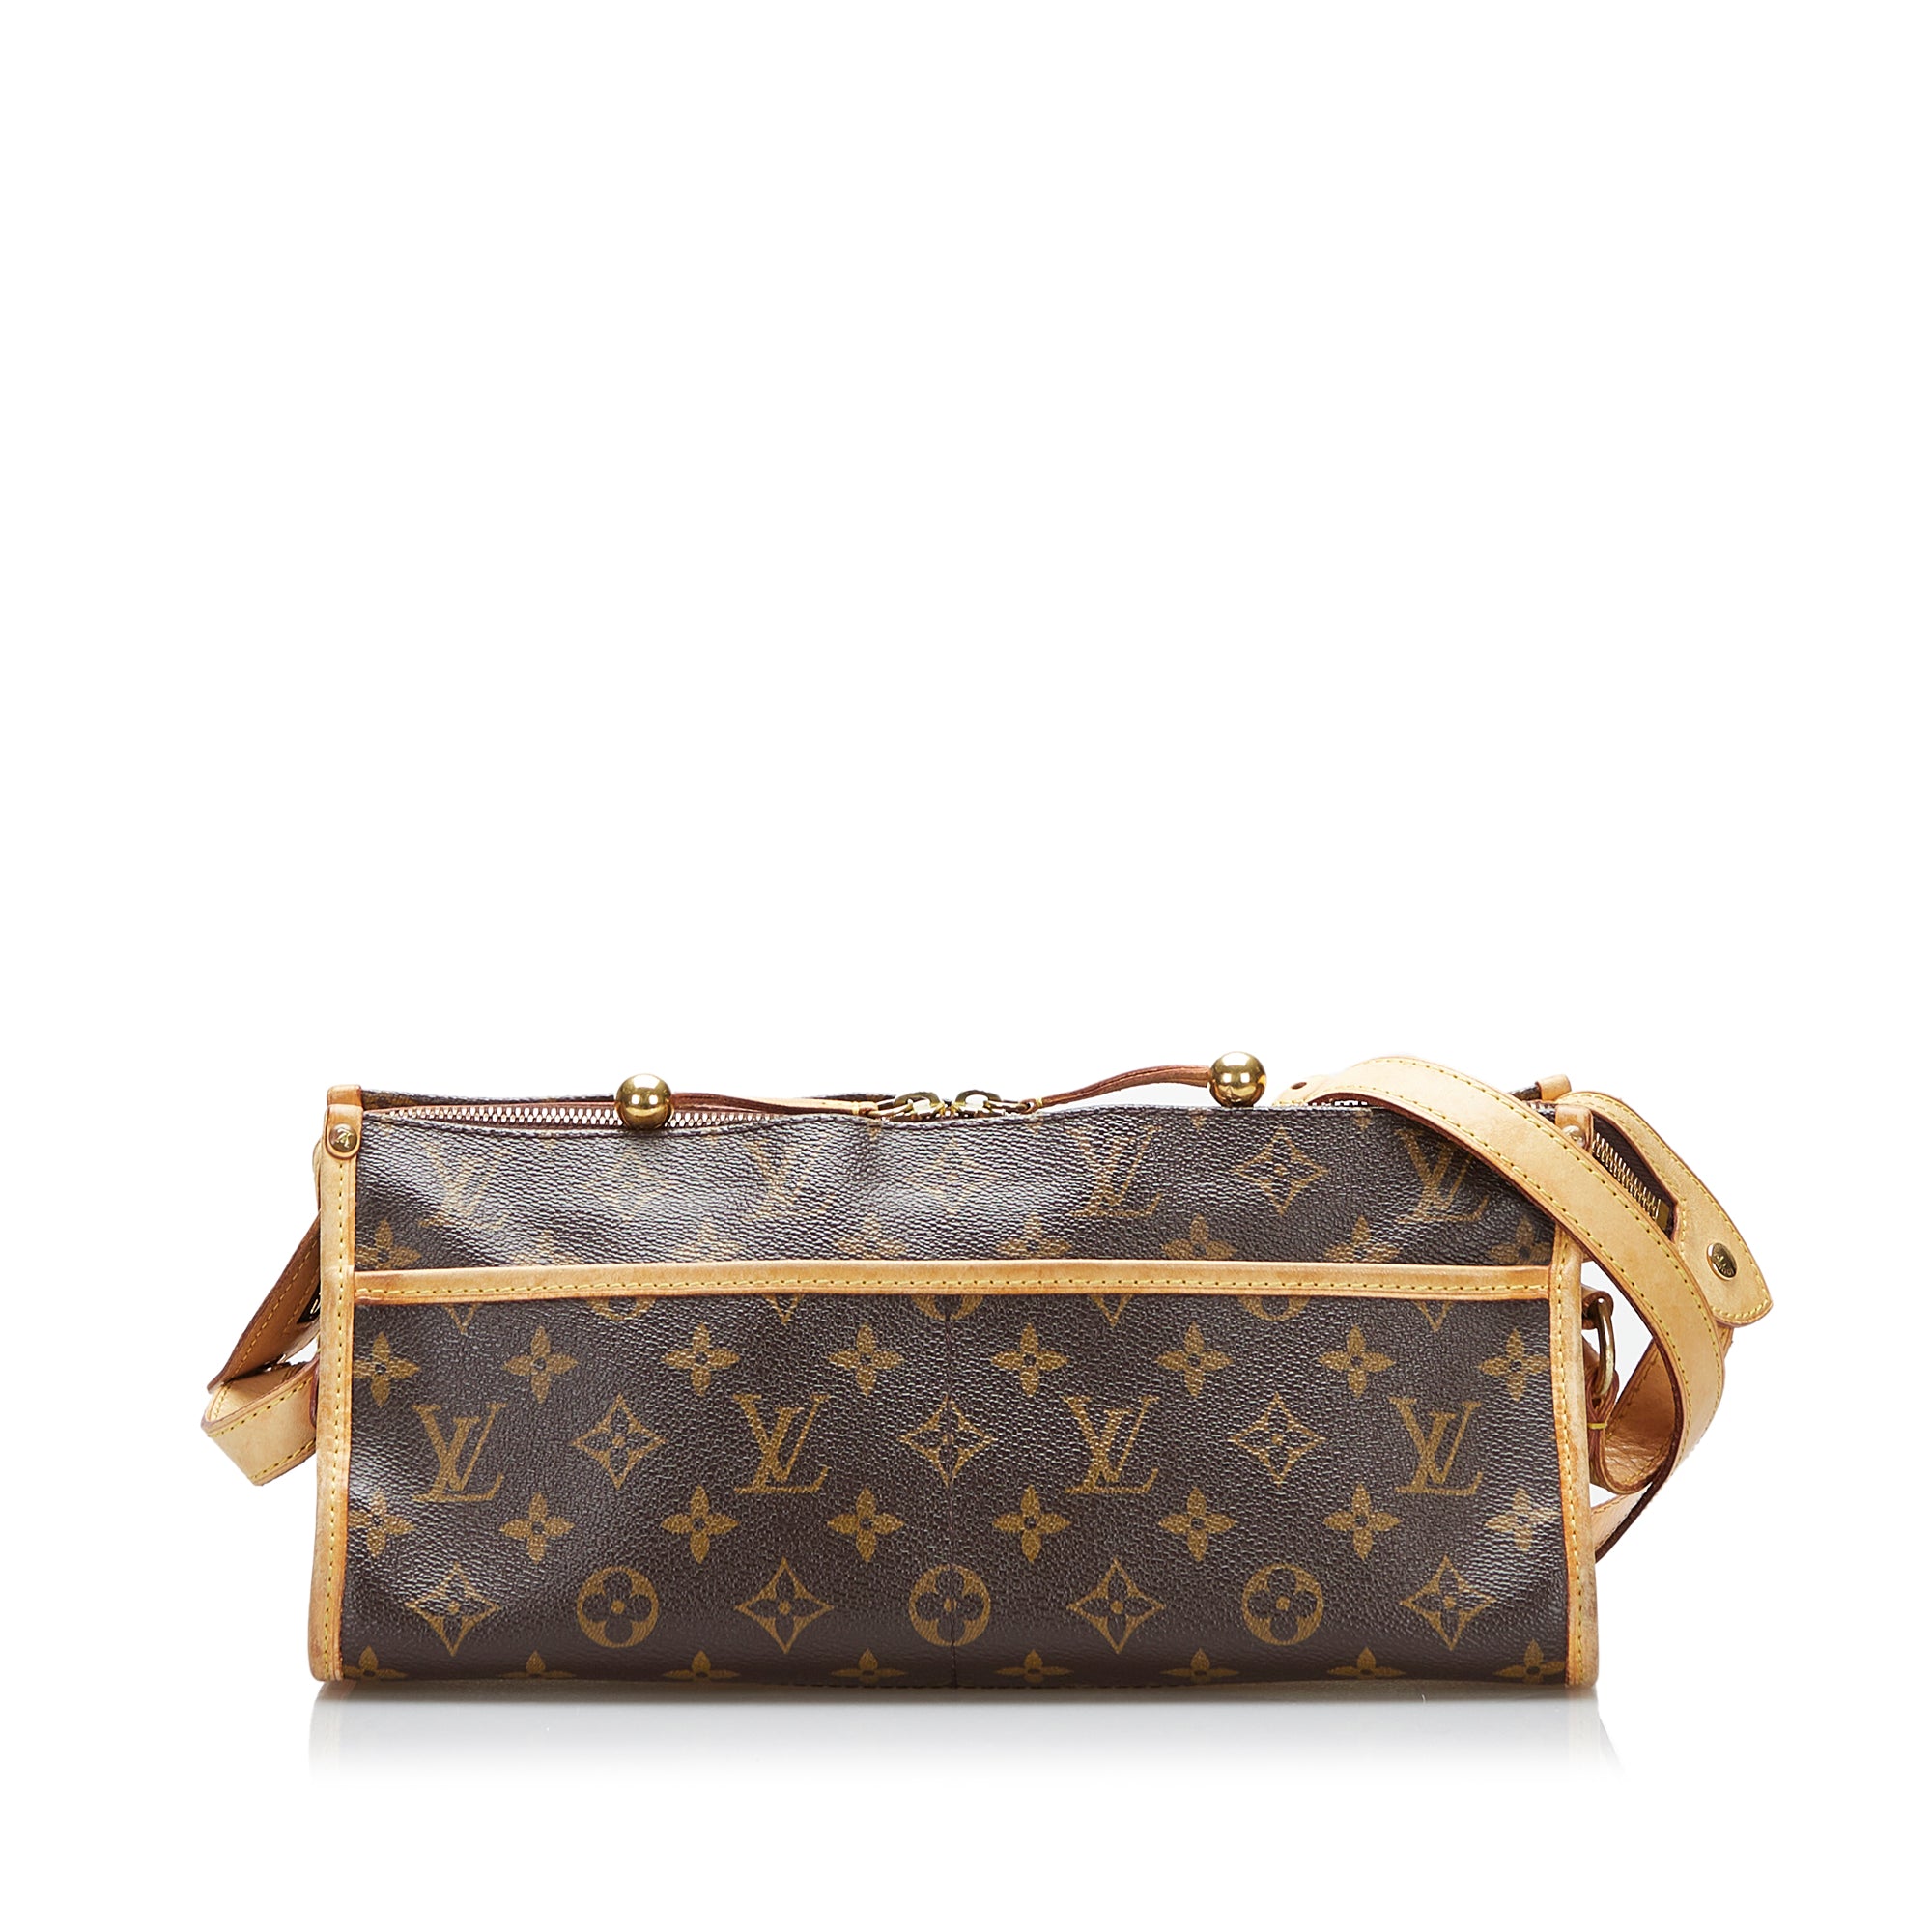 Introducing the Louis Vuitton Side Trunk Bag, RvceShops Revival